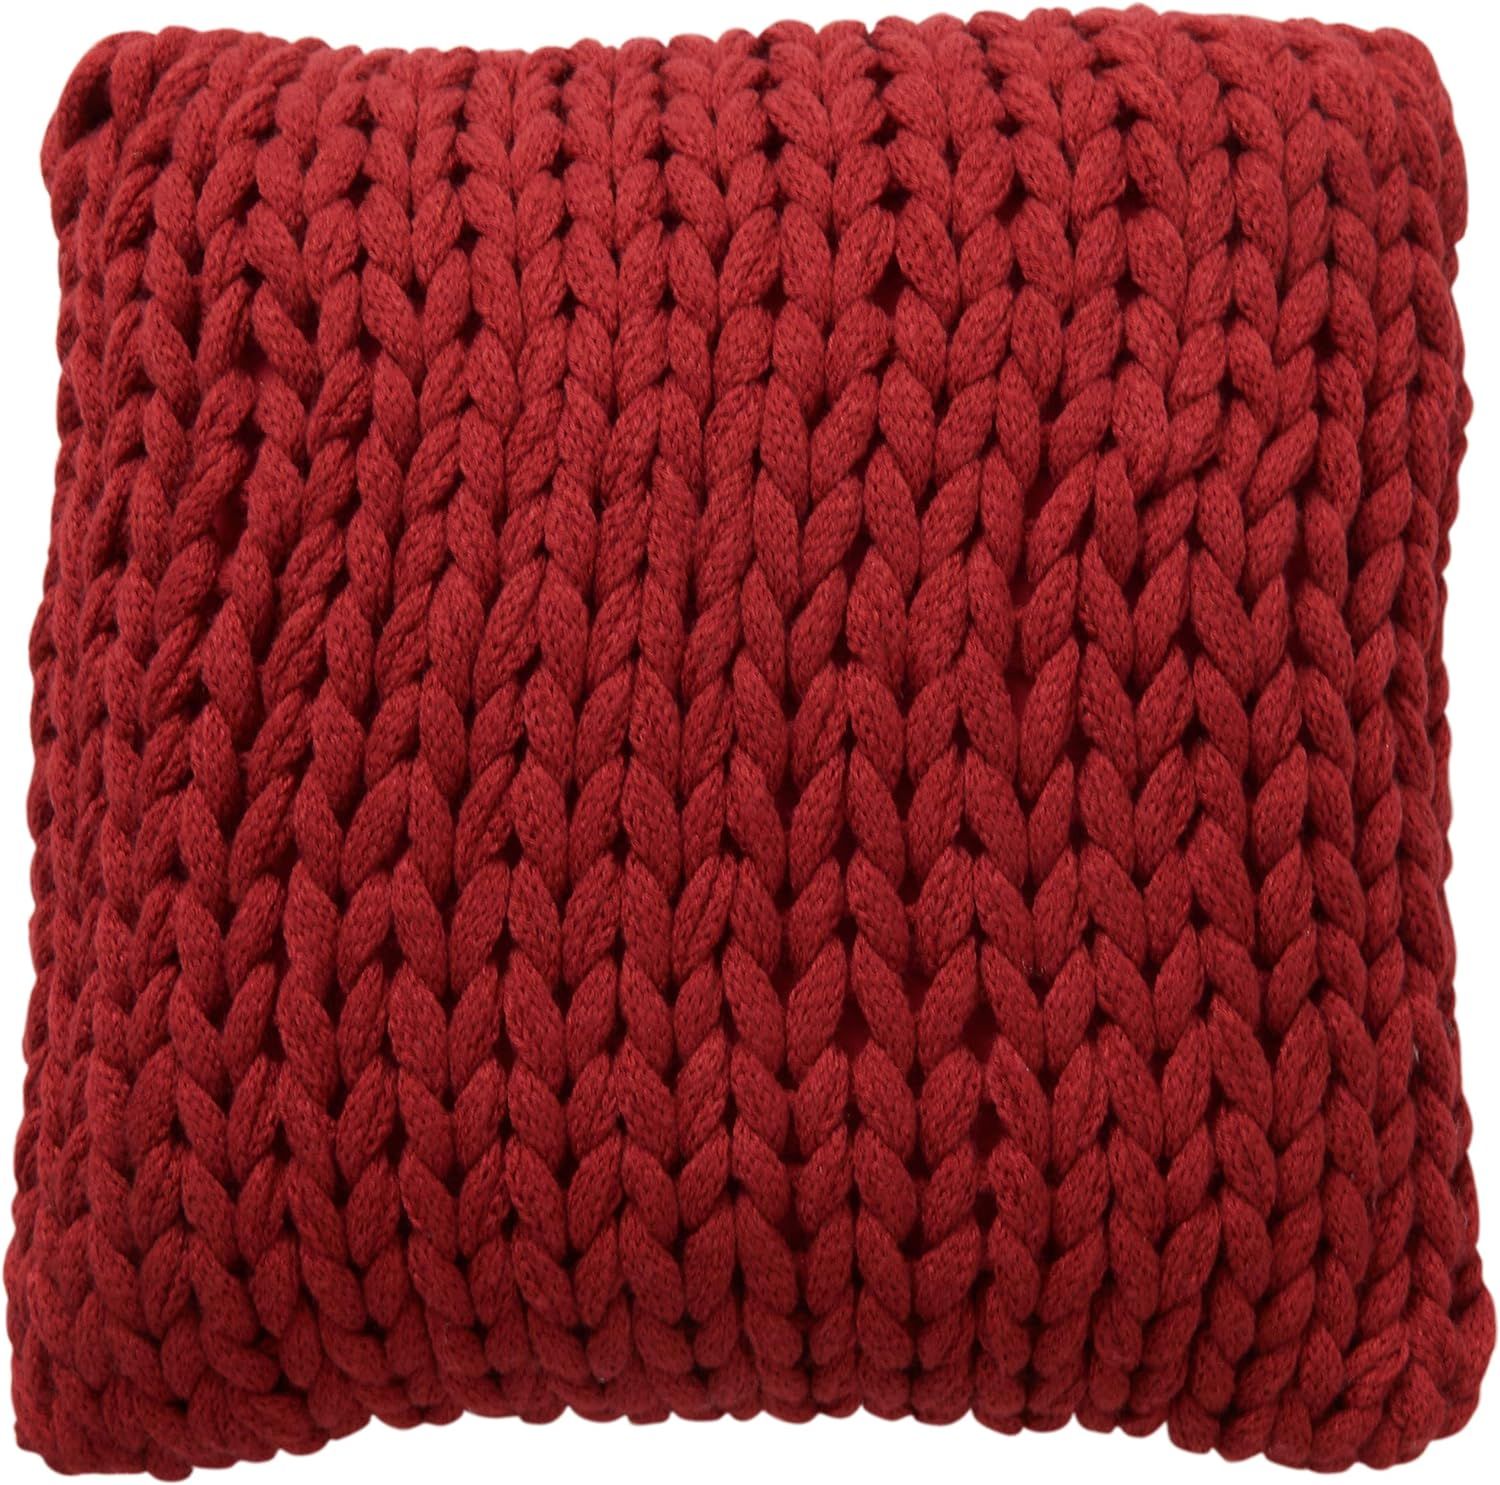 Cheer Collection Chunky Cable Knit Throw Pillow, 18" x 18" Decorative Couch Pillow (Burgundy) | Amazon (US)